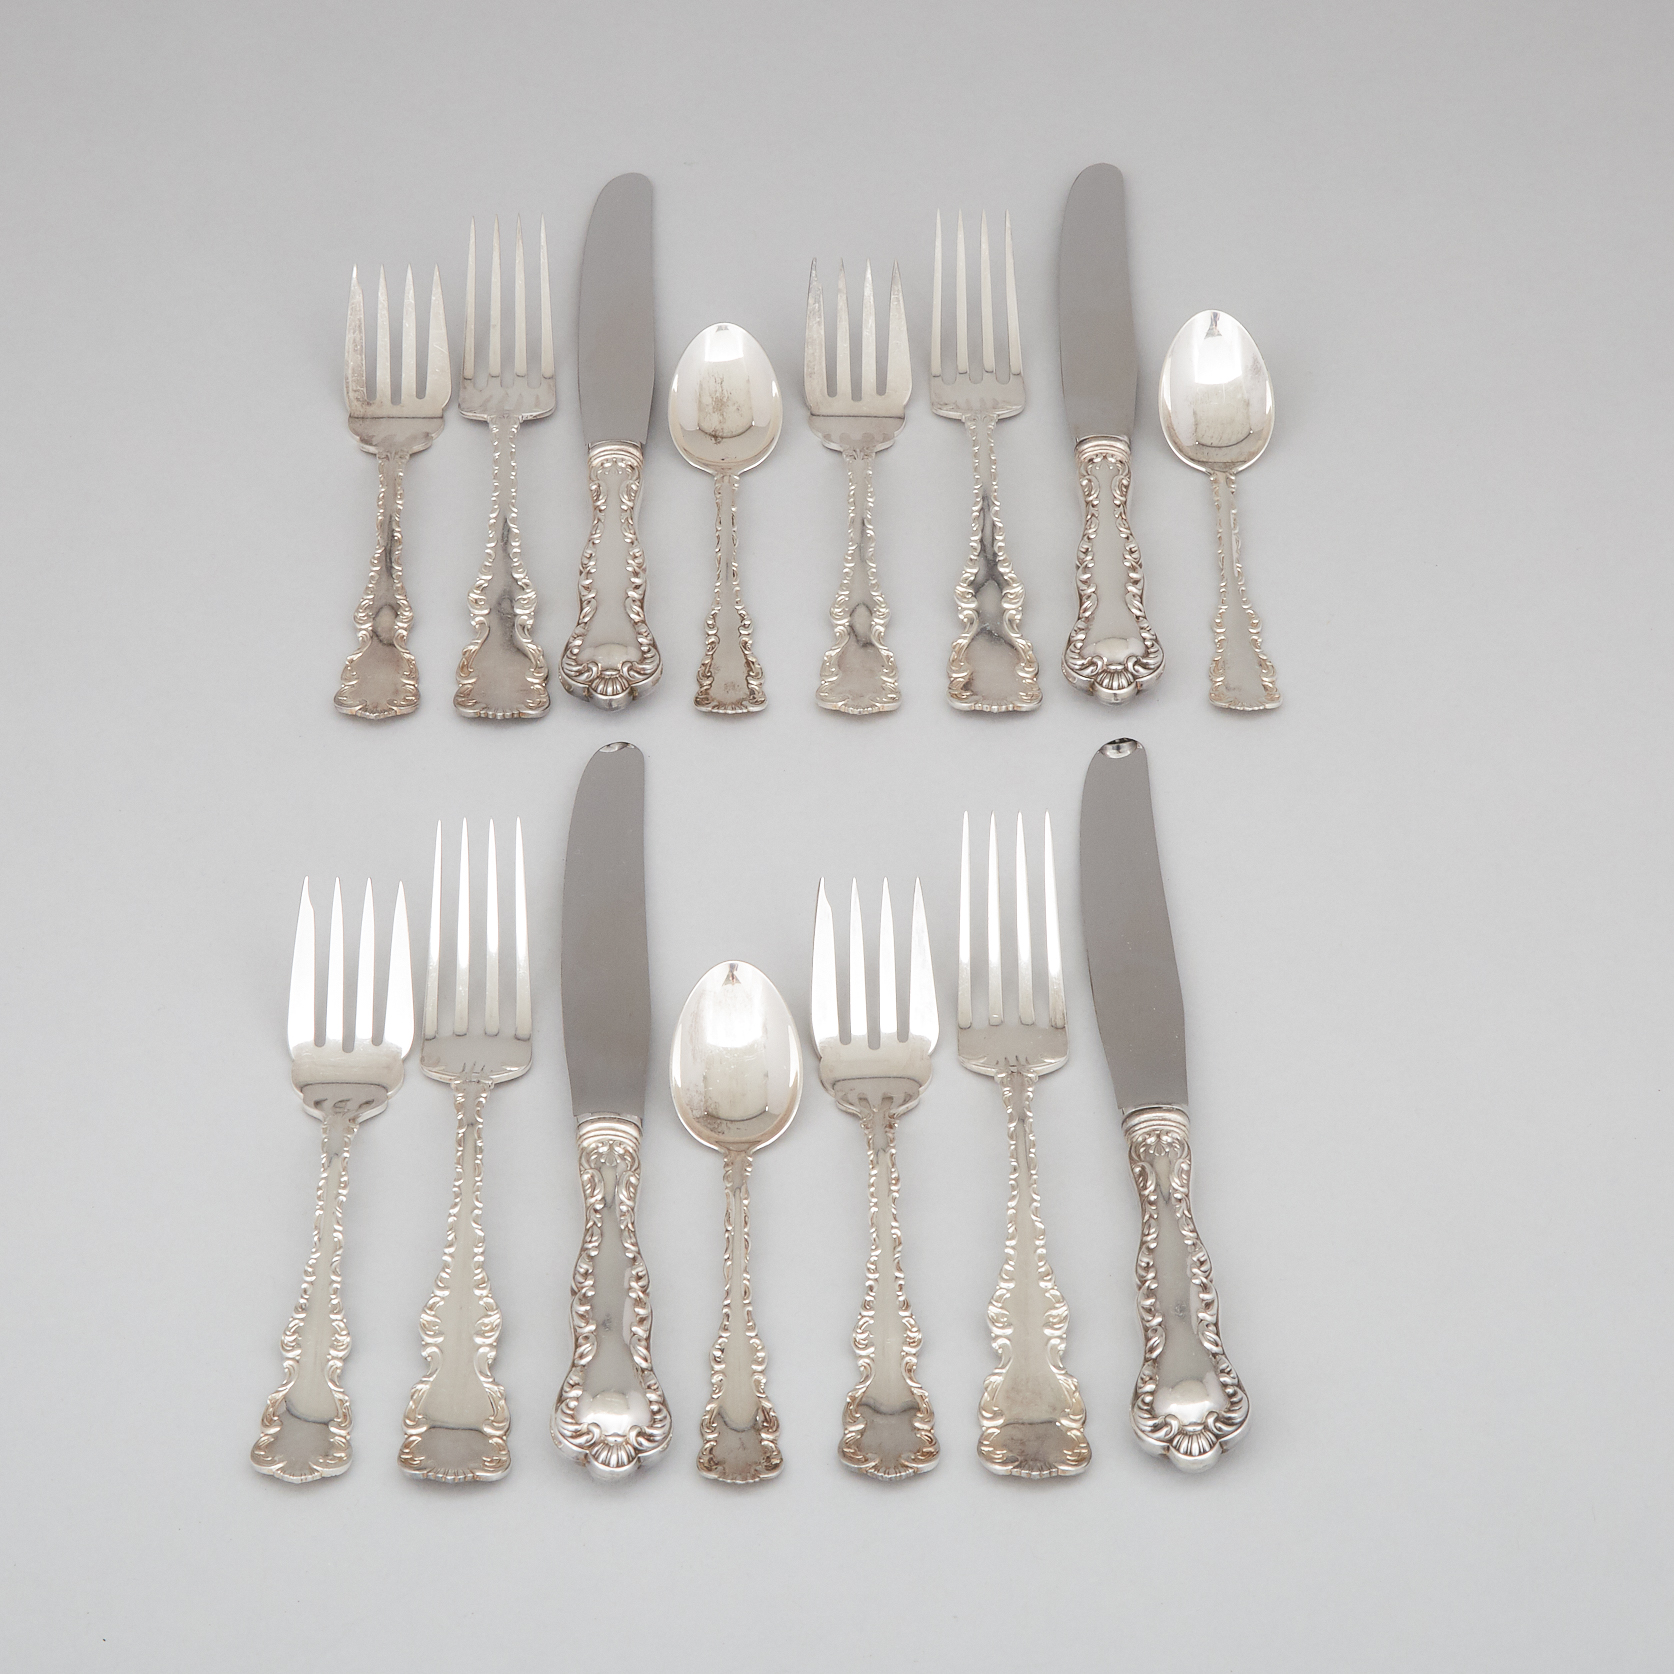 Canadian Silver ‘Louis XV’ Pattern Flatware, Henry Birks & Sons, Montreal, Que., 20th century